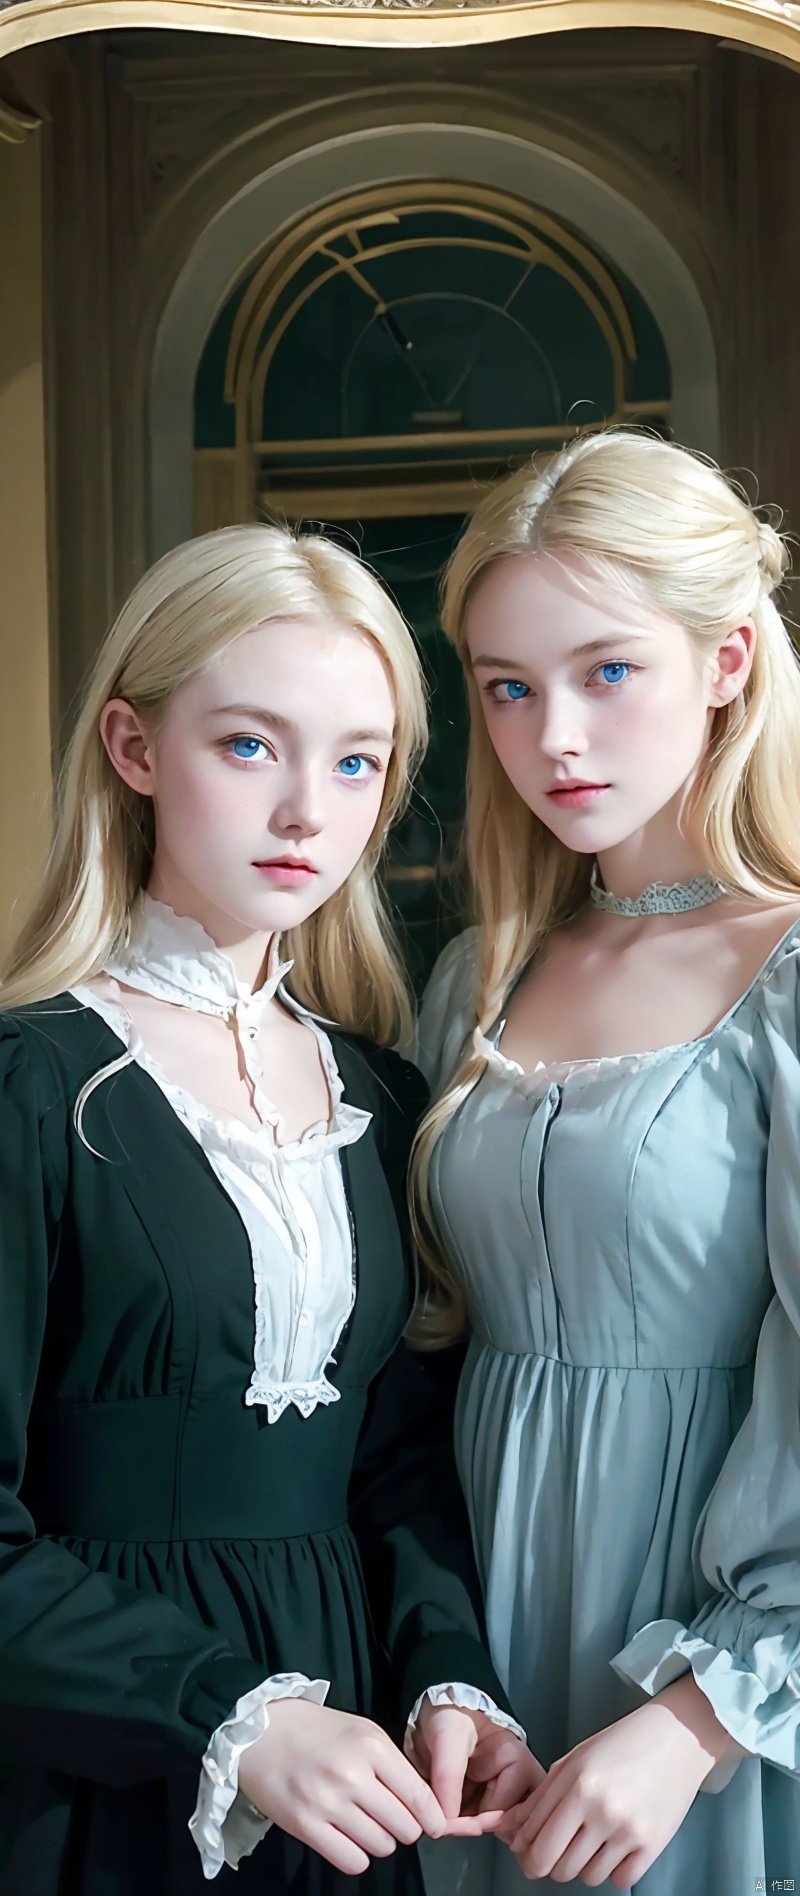 two girls, (Virginia Otis, 15 years old (blond hair, blue eyes)) pose with (16 years old Georgie Gerald (blond hair, green eyes)). Victorian style. thin, cute face, walks at night in Canterville Castle (inspired by the novel The Canterville Ghost). aged 1887, Victorian fantasy